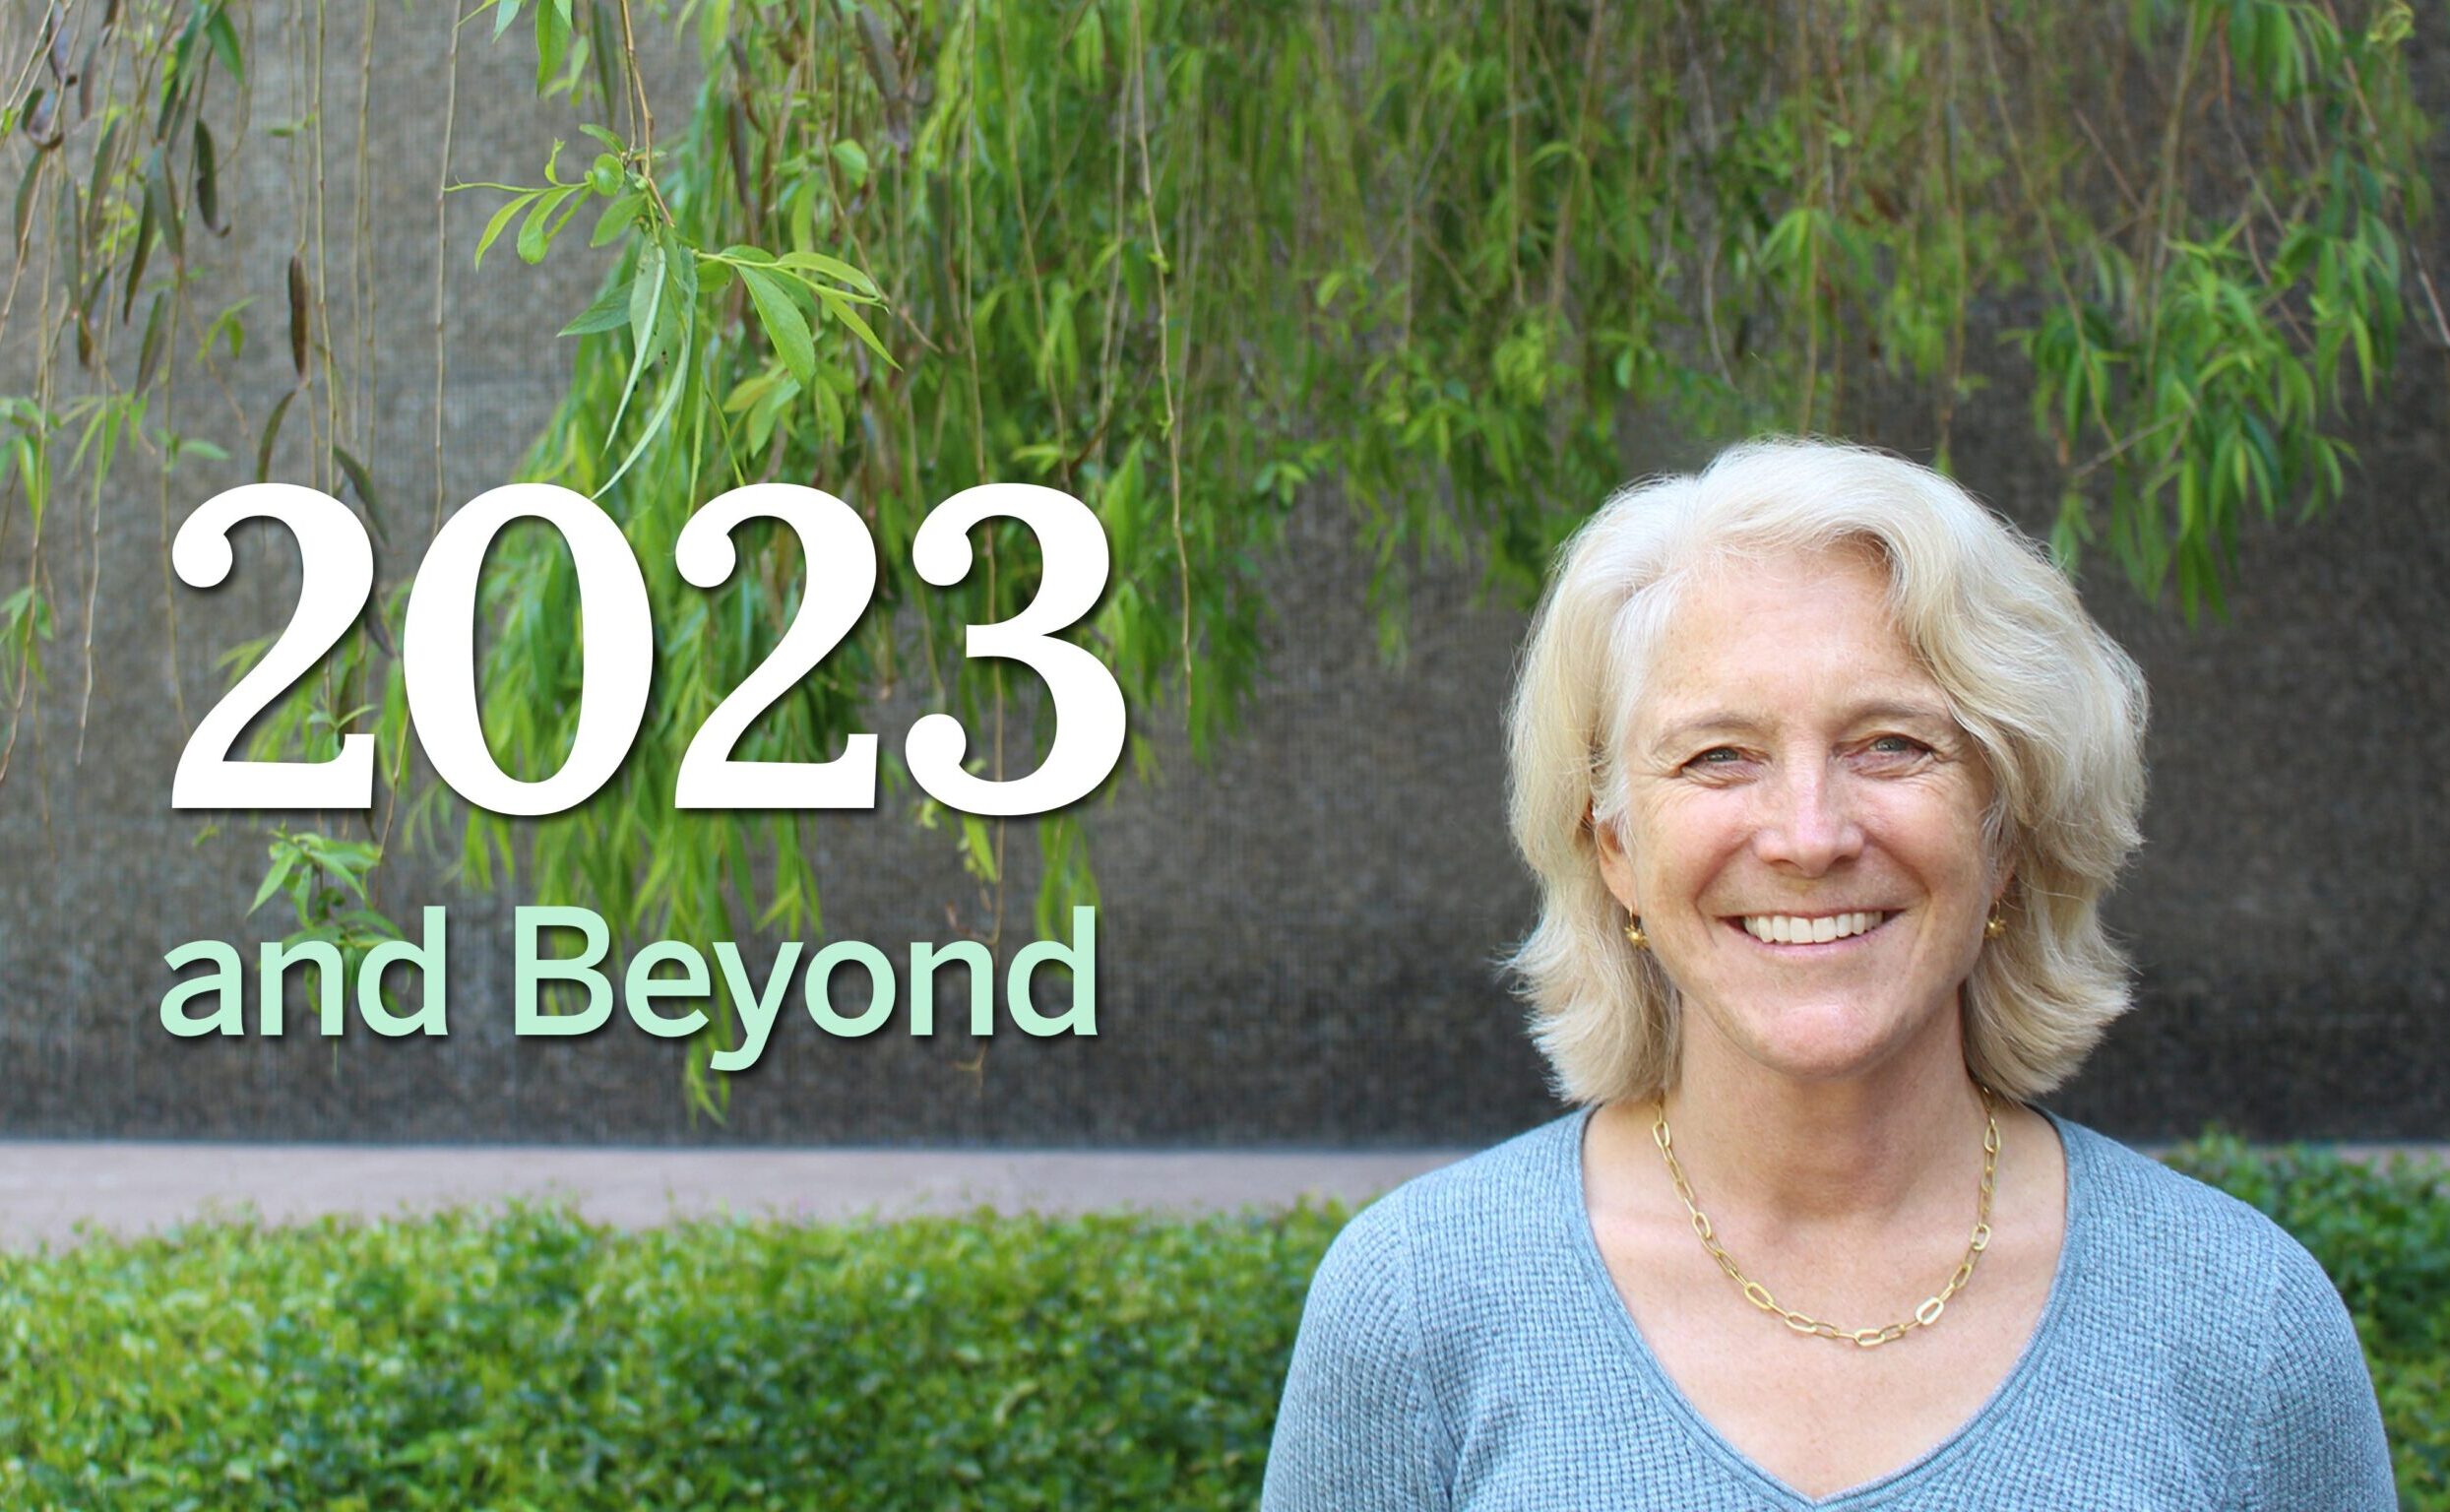 A picture of CEO Ashley Boren. To the left, text reads "2023 and Beyond"